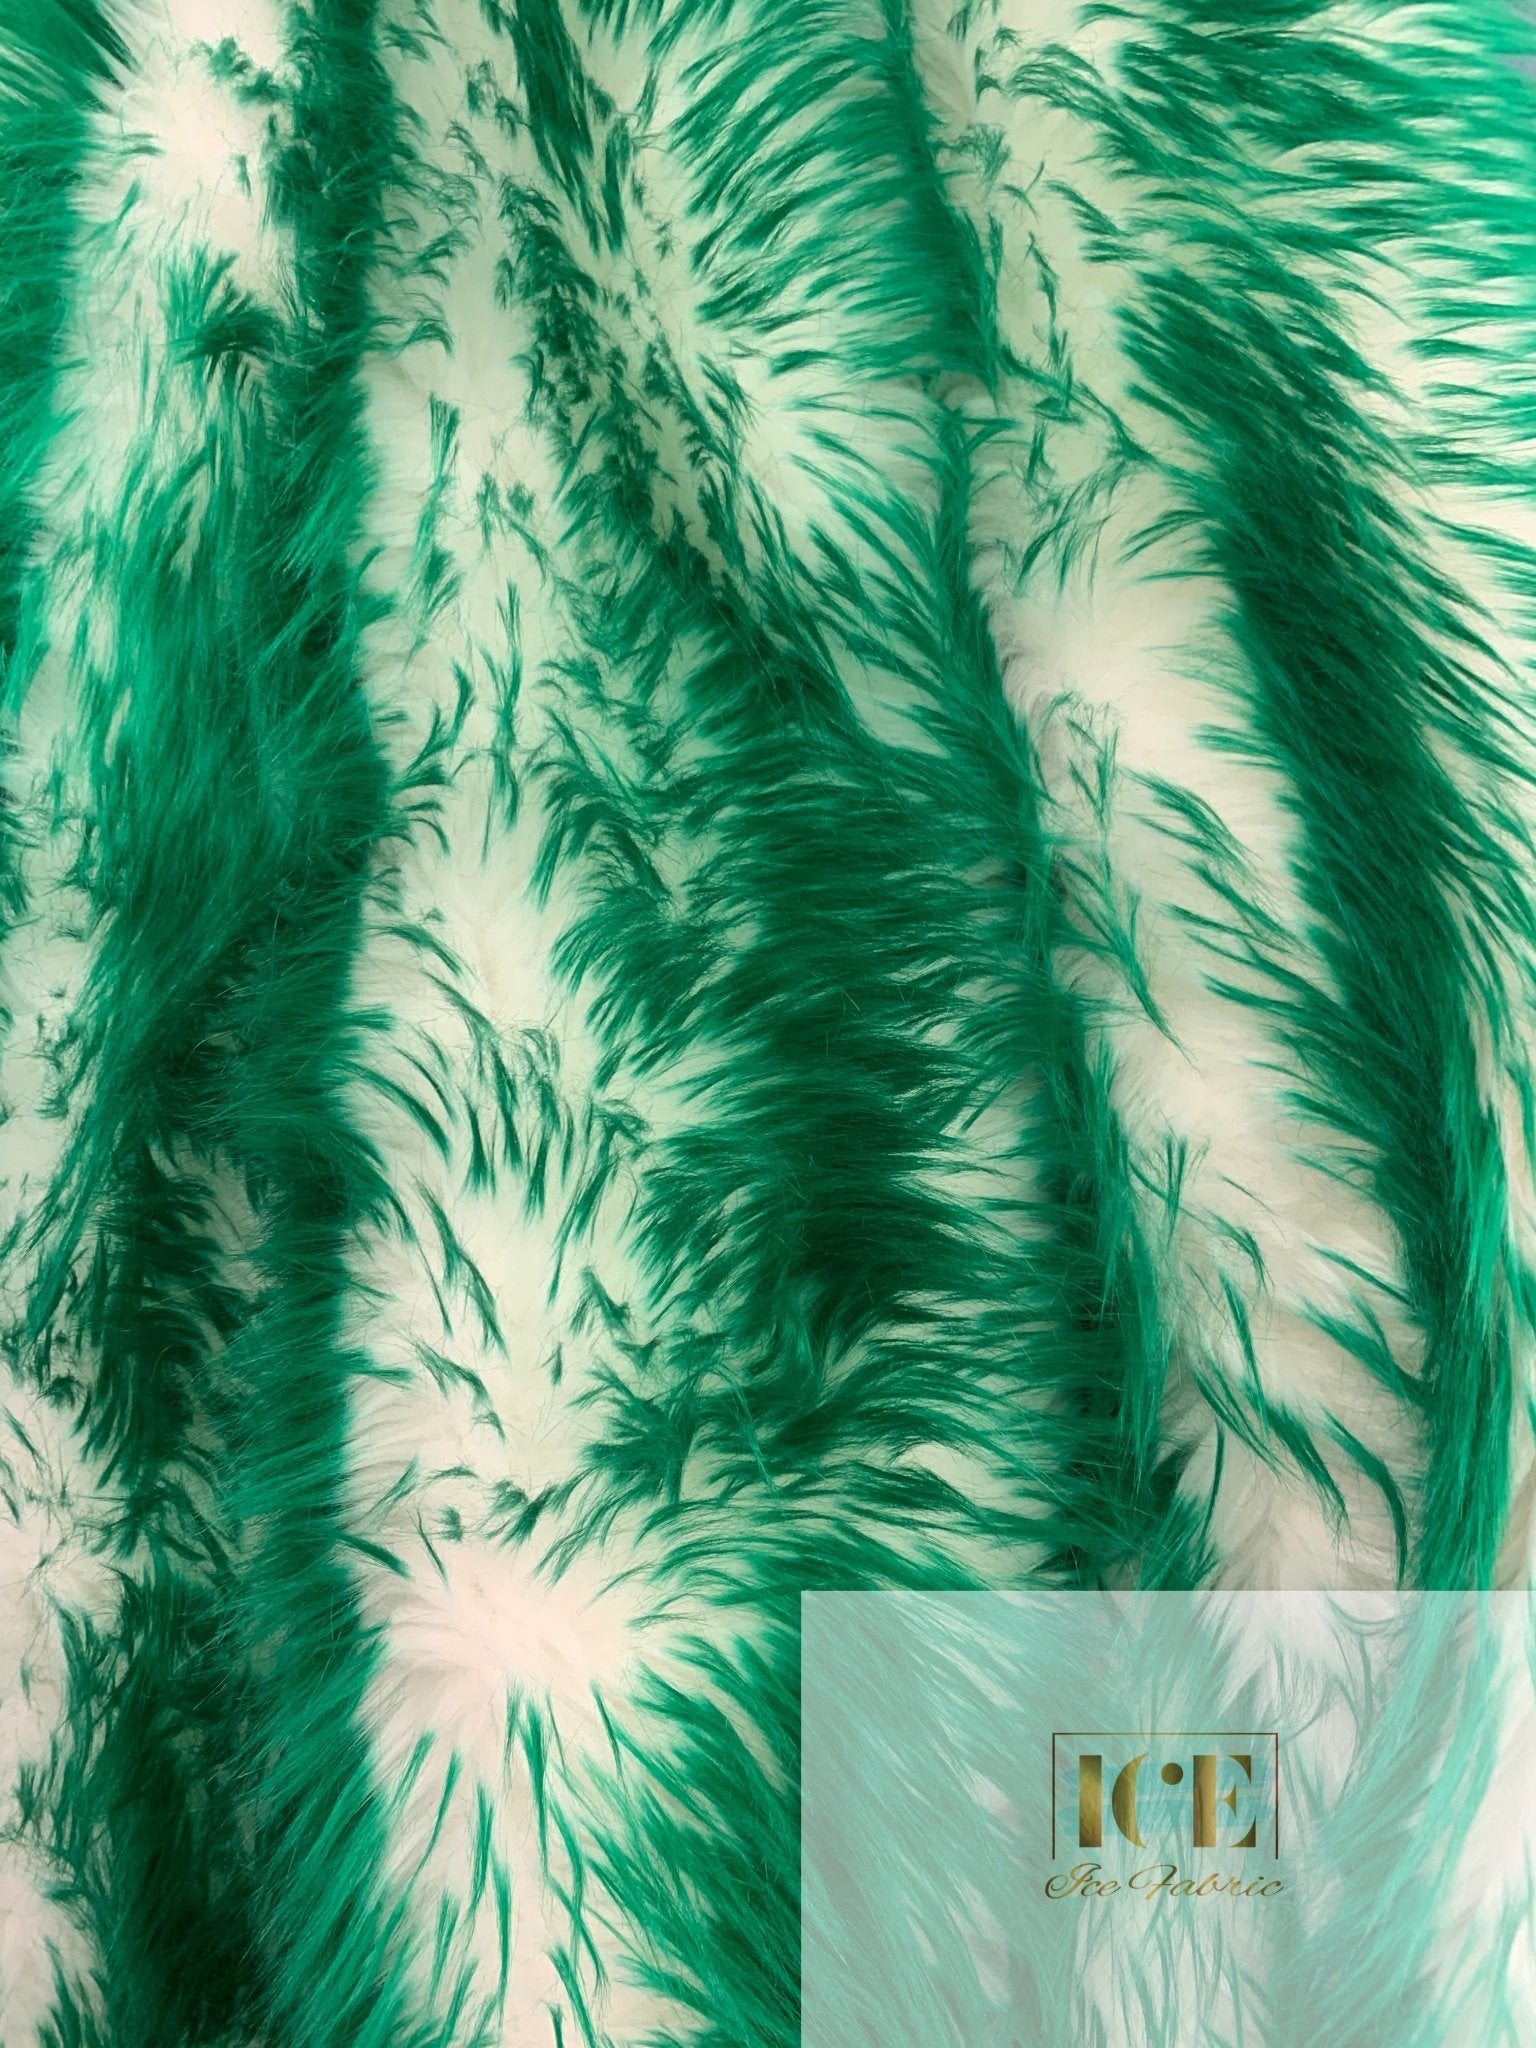 Canadian Fox 2 Tone Shaggy Long Pile Faux Fur Fabric For Blankets, Costumes, Bed SpreadICEFABRICICE FABRICSKelly GreenBy The Yard (60 inches Wide)Canadian Fox 2 Tone Shaggy Long Pile Faux Fur Fabric For Blankets, Costumes, Bed Spread ICEFABRIC Kelly Green